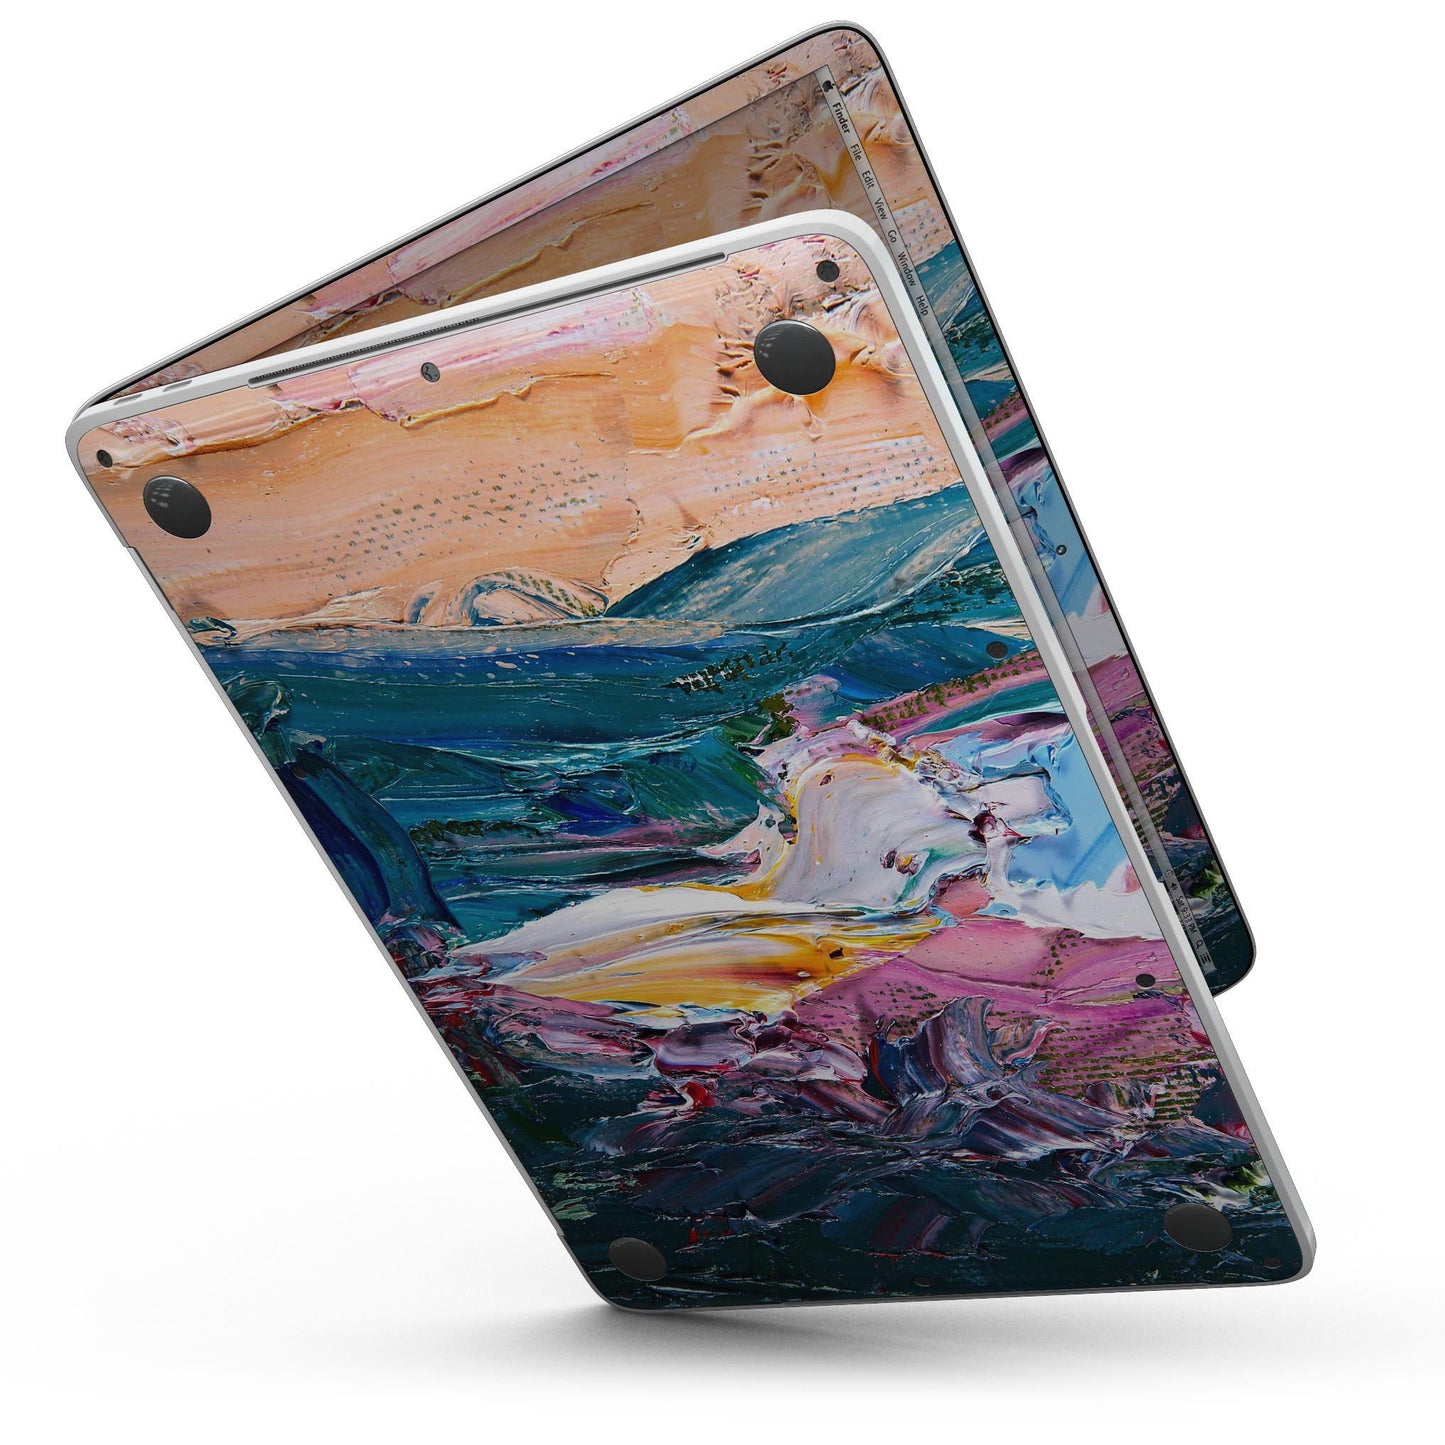 Abstract Oil Strokes - MacBook Pro with Touch Bar Skin Kit